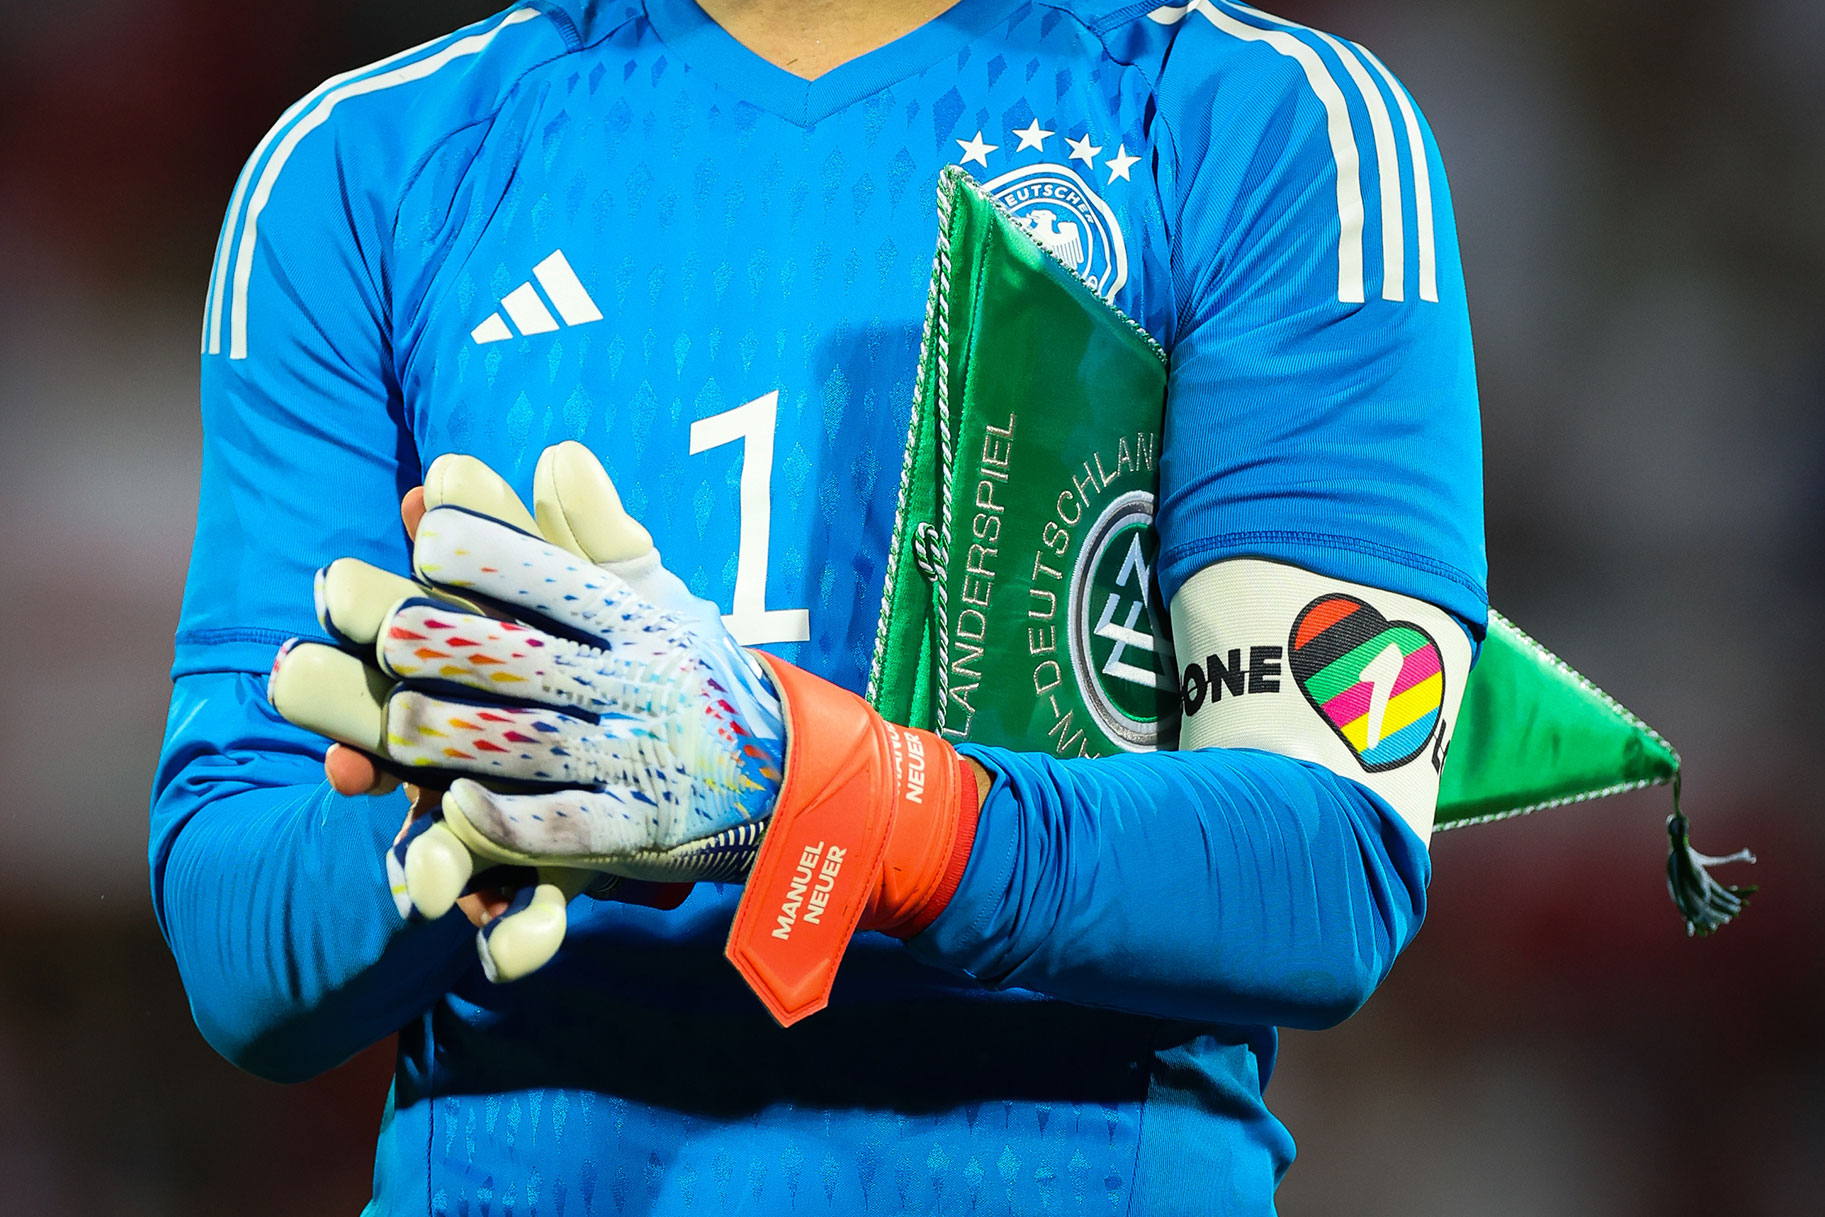 Germany's goalkeeper and captain Manuel Neuer wears the captain's armband with the inscription "One Love"